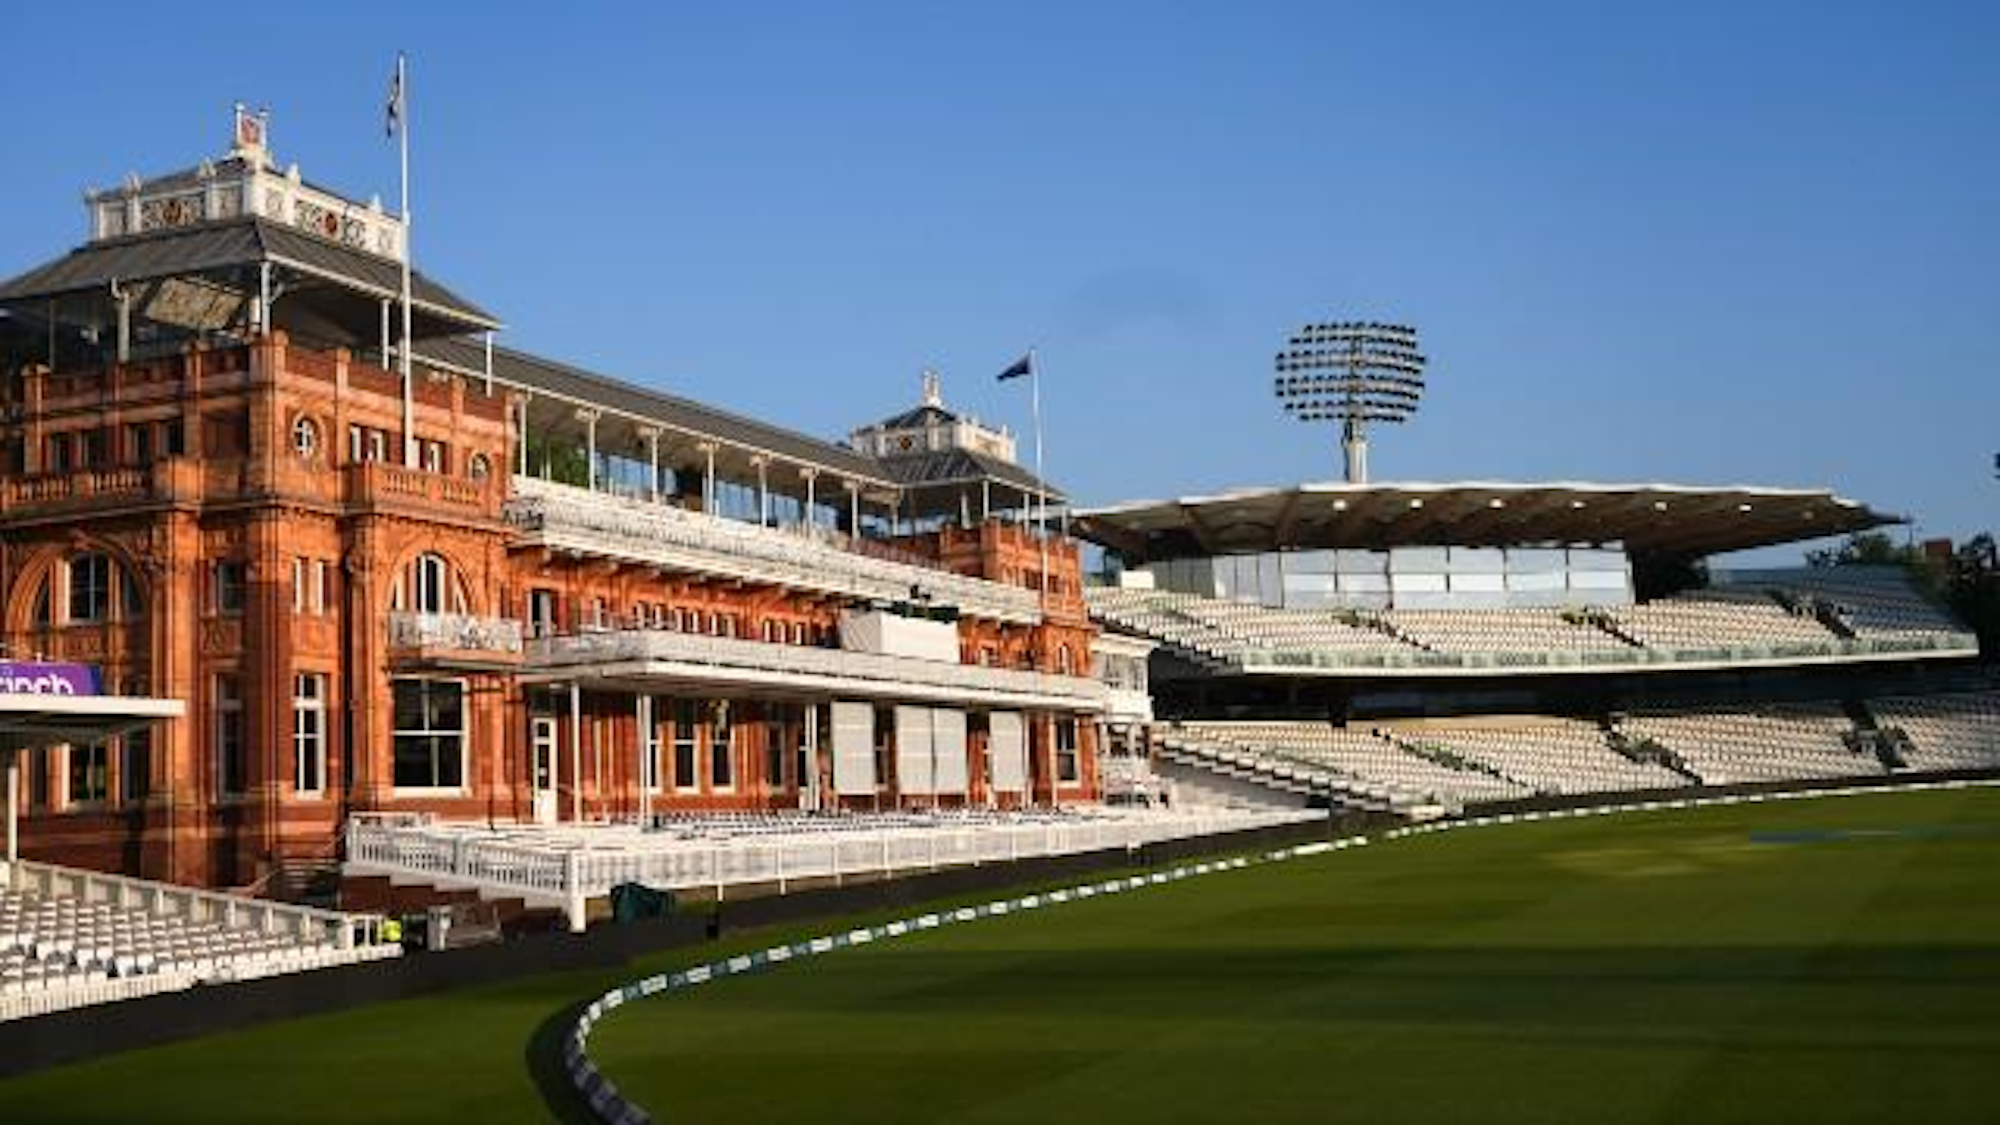 Lords cricket ground main building shot